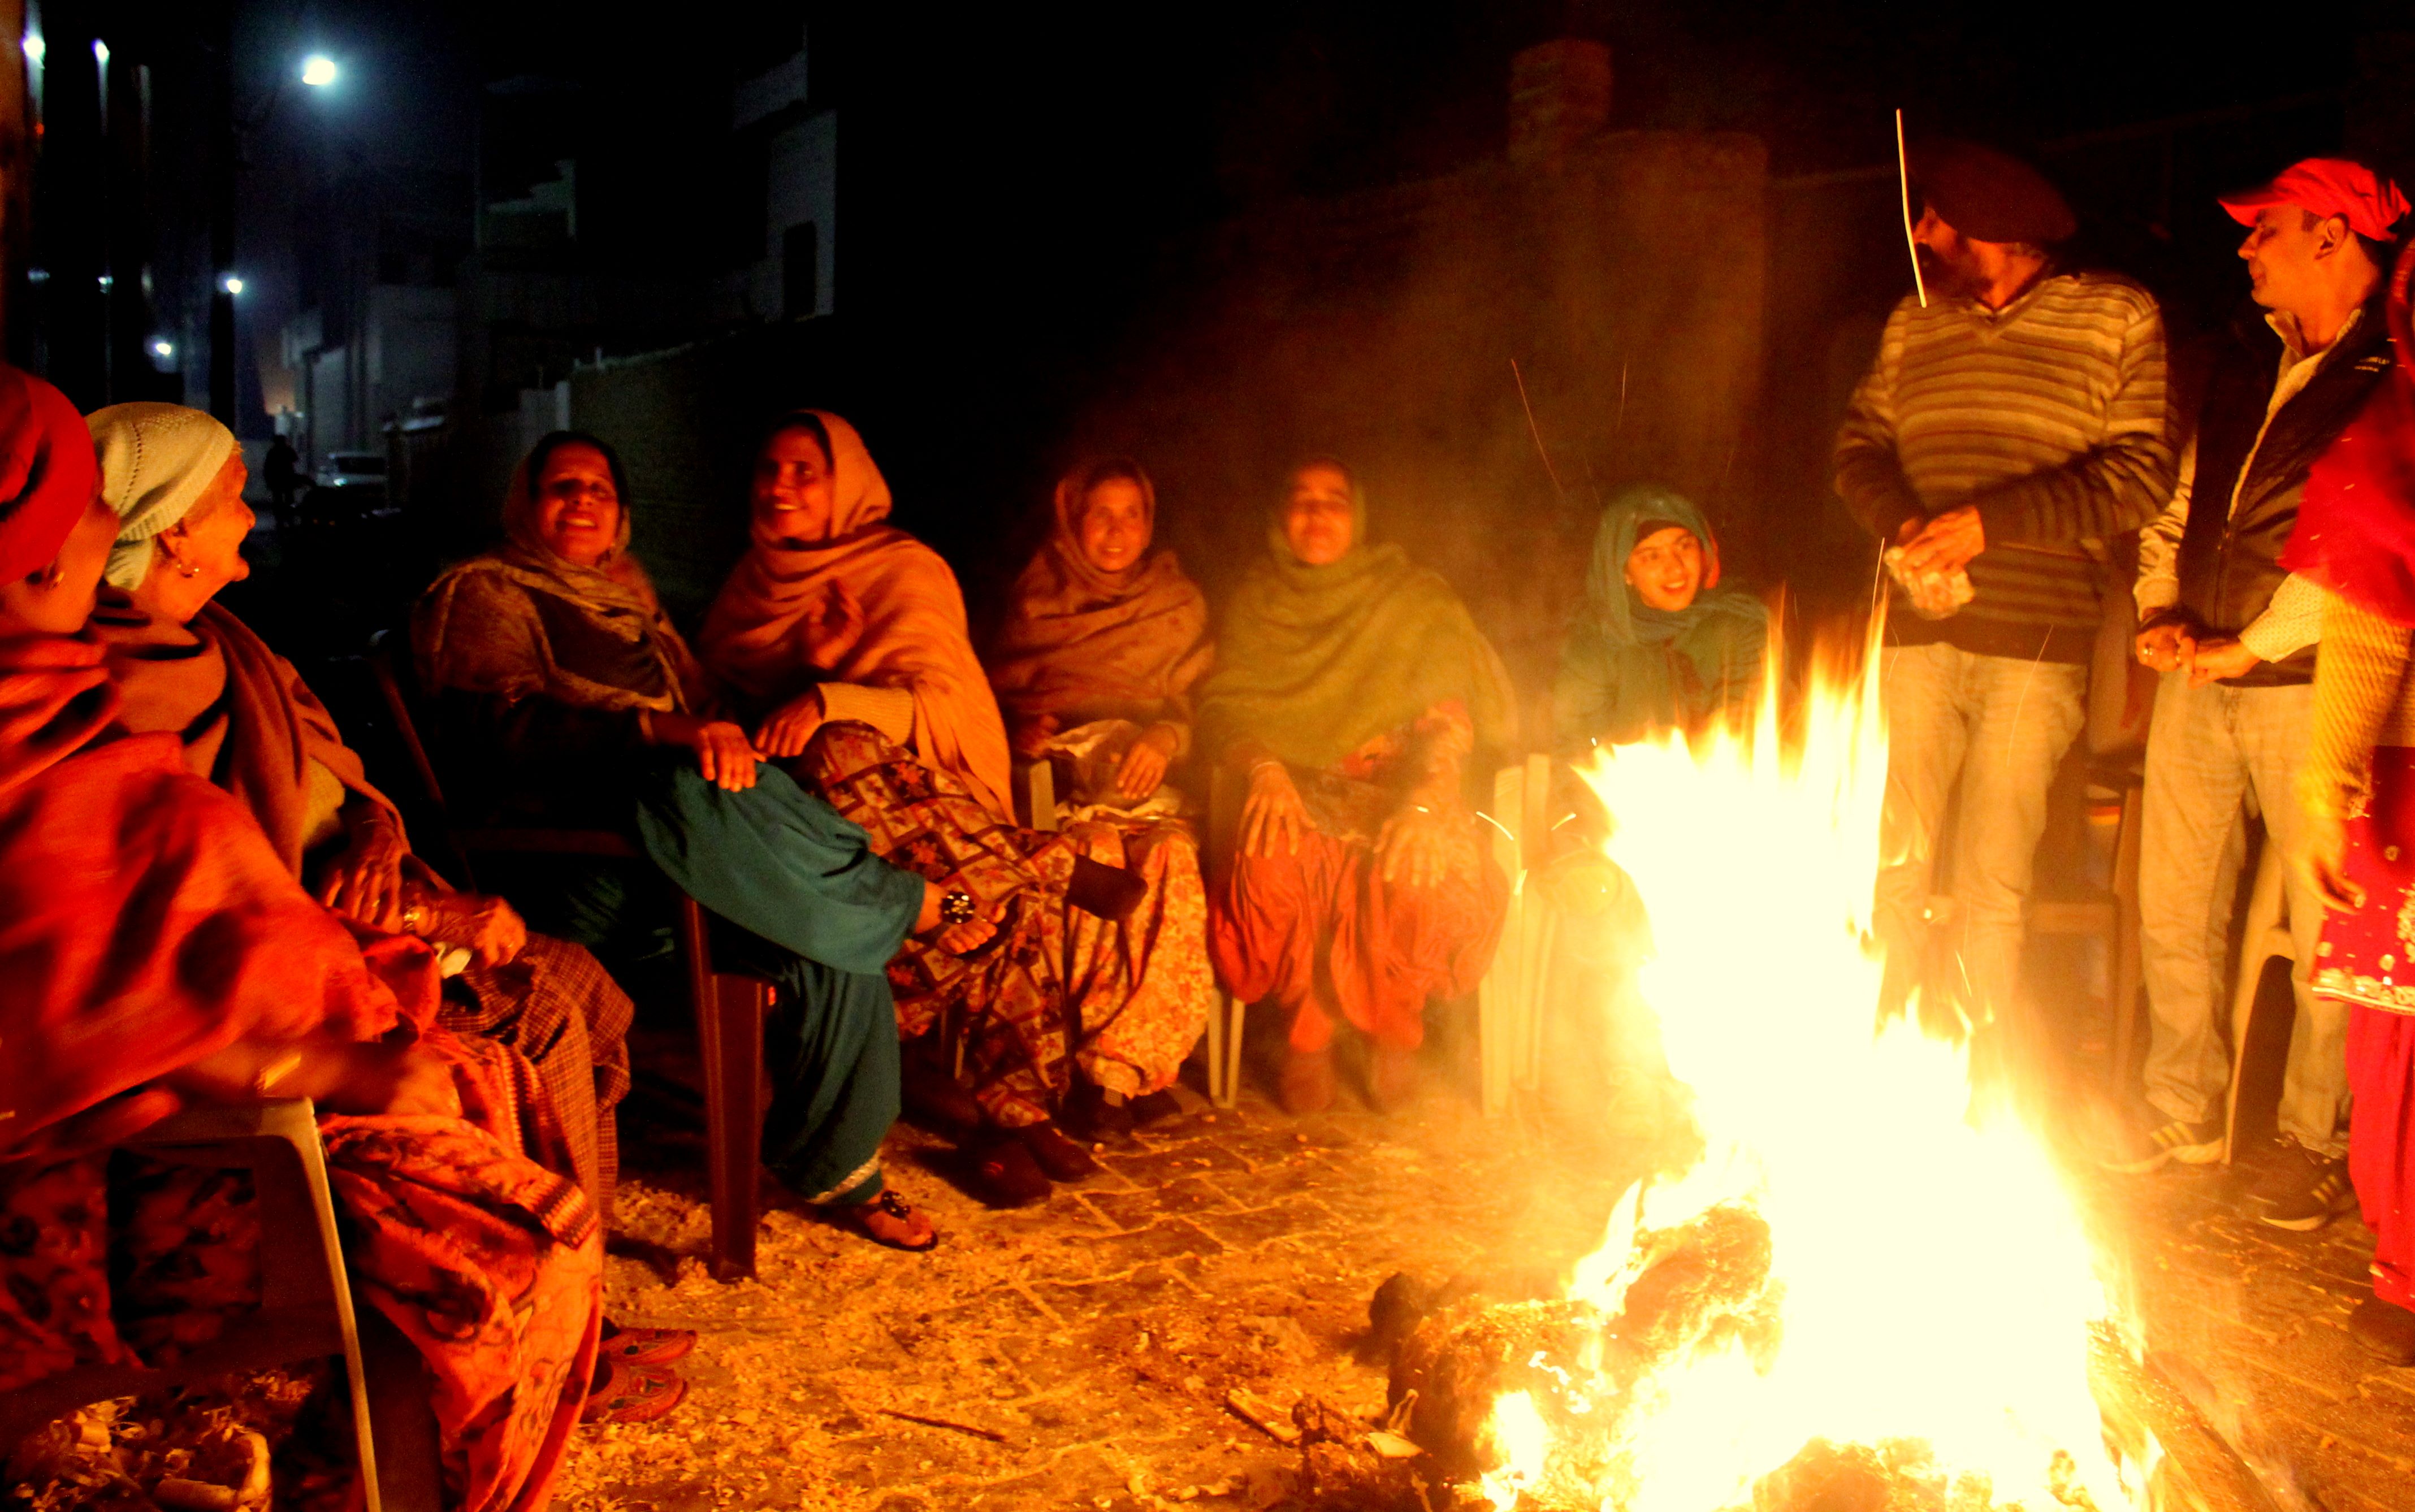 North India to face severe cold in upcoming weeks, warns climate department